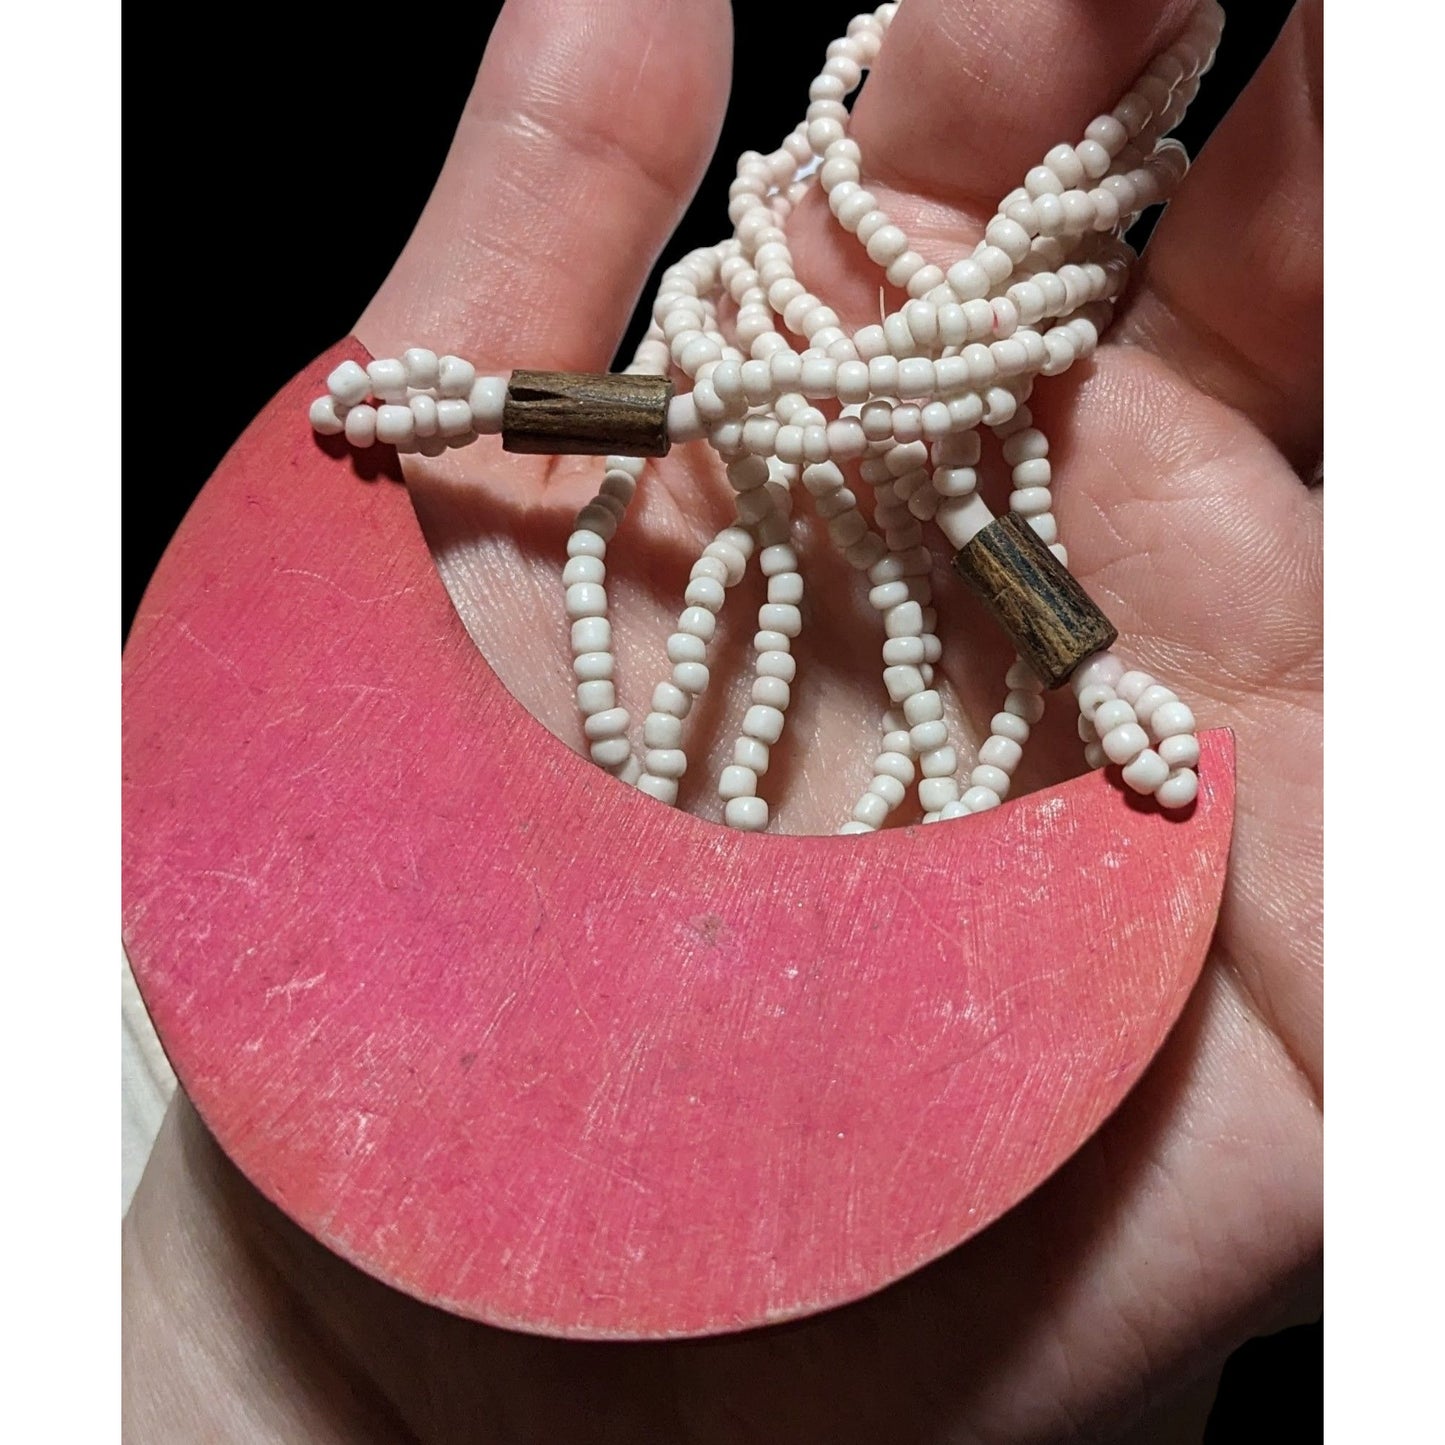 Beaded Necklace With Geometric Pendant In Pink & White